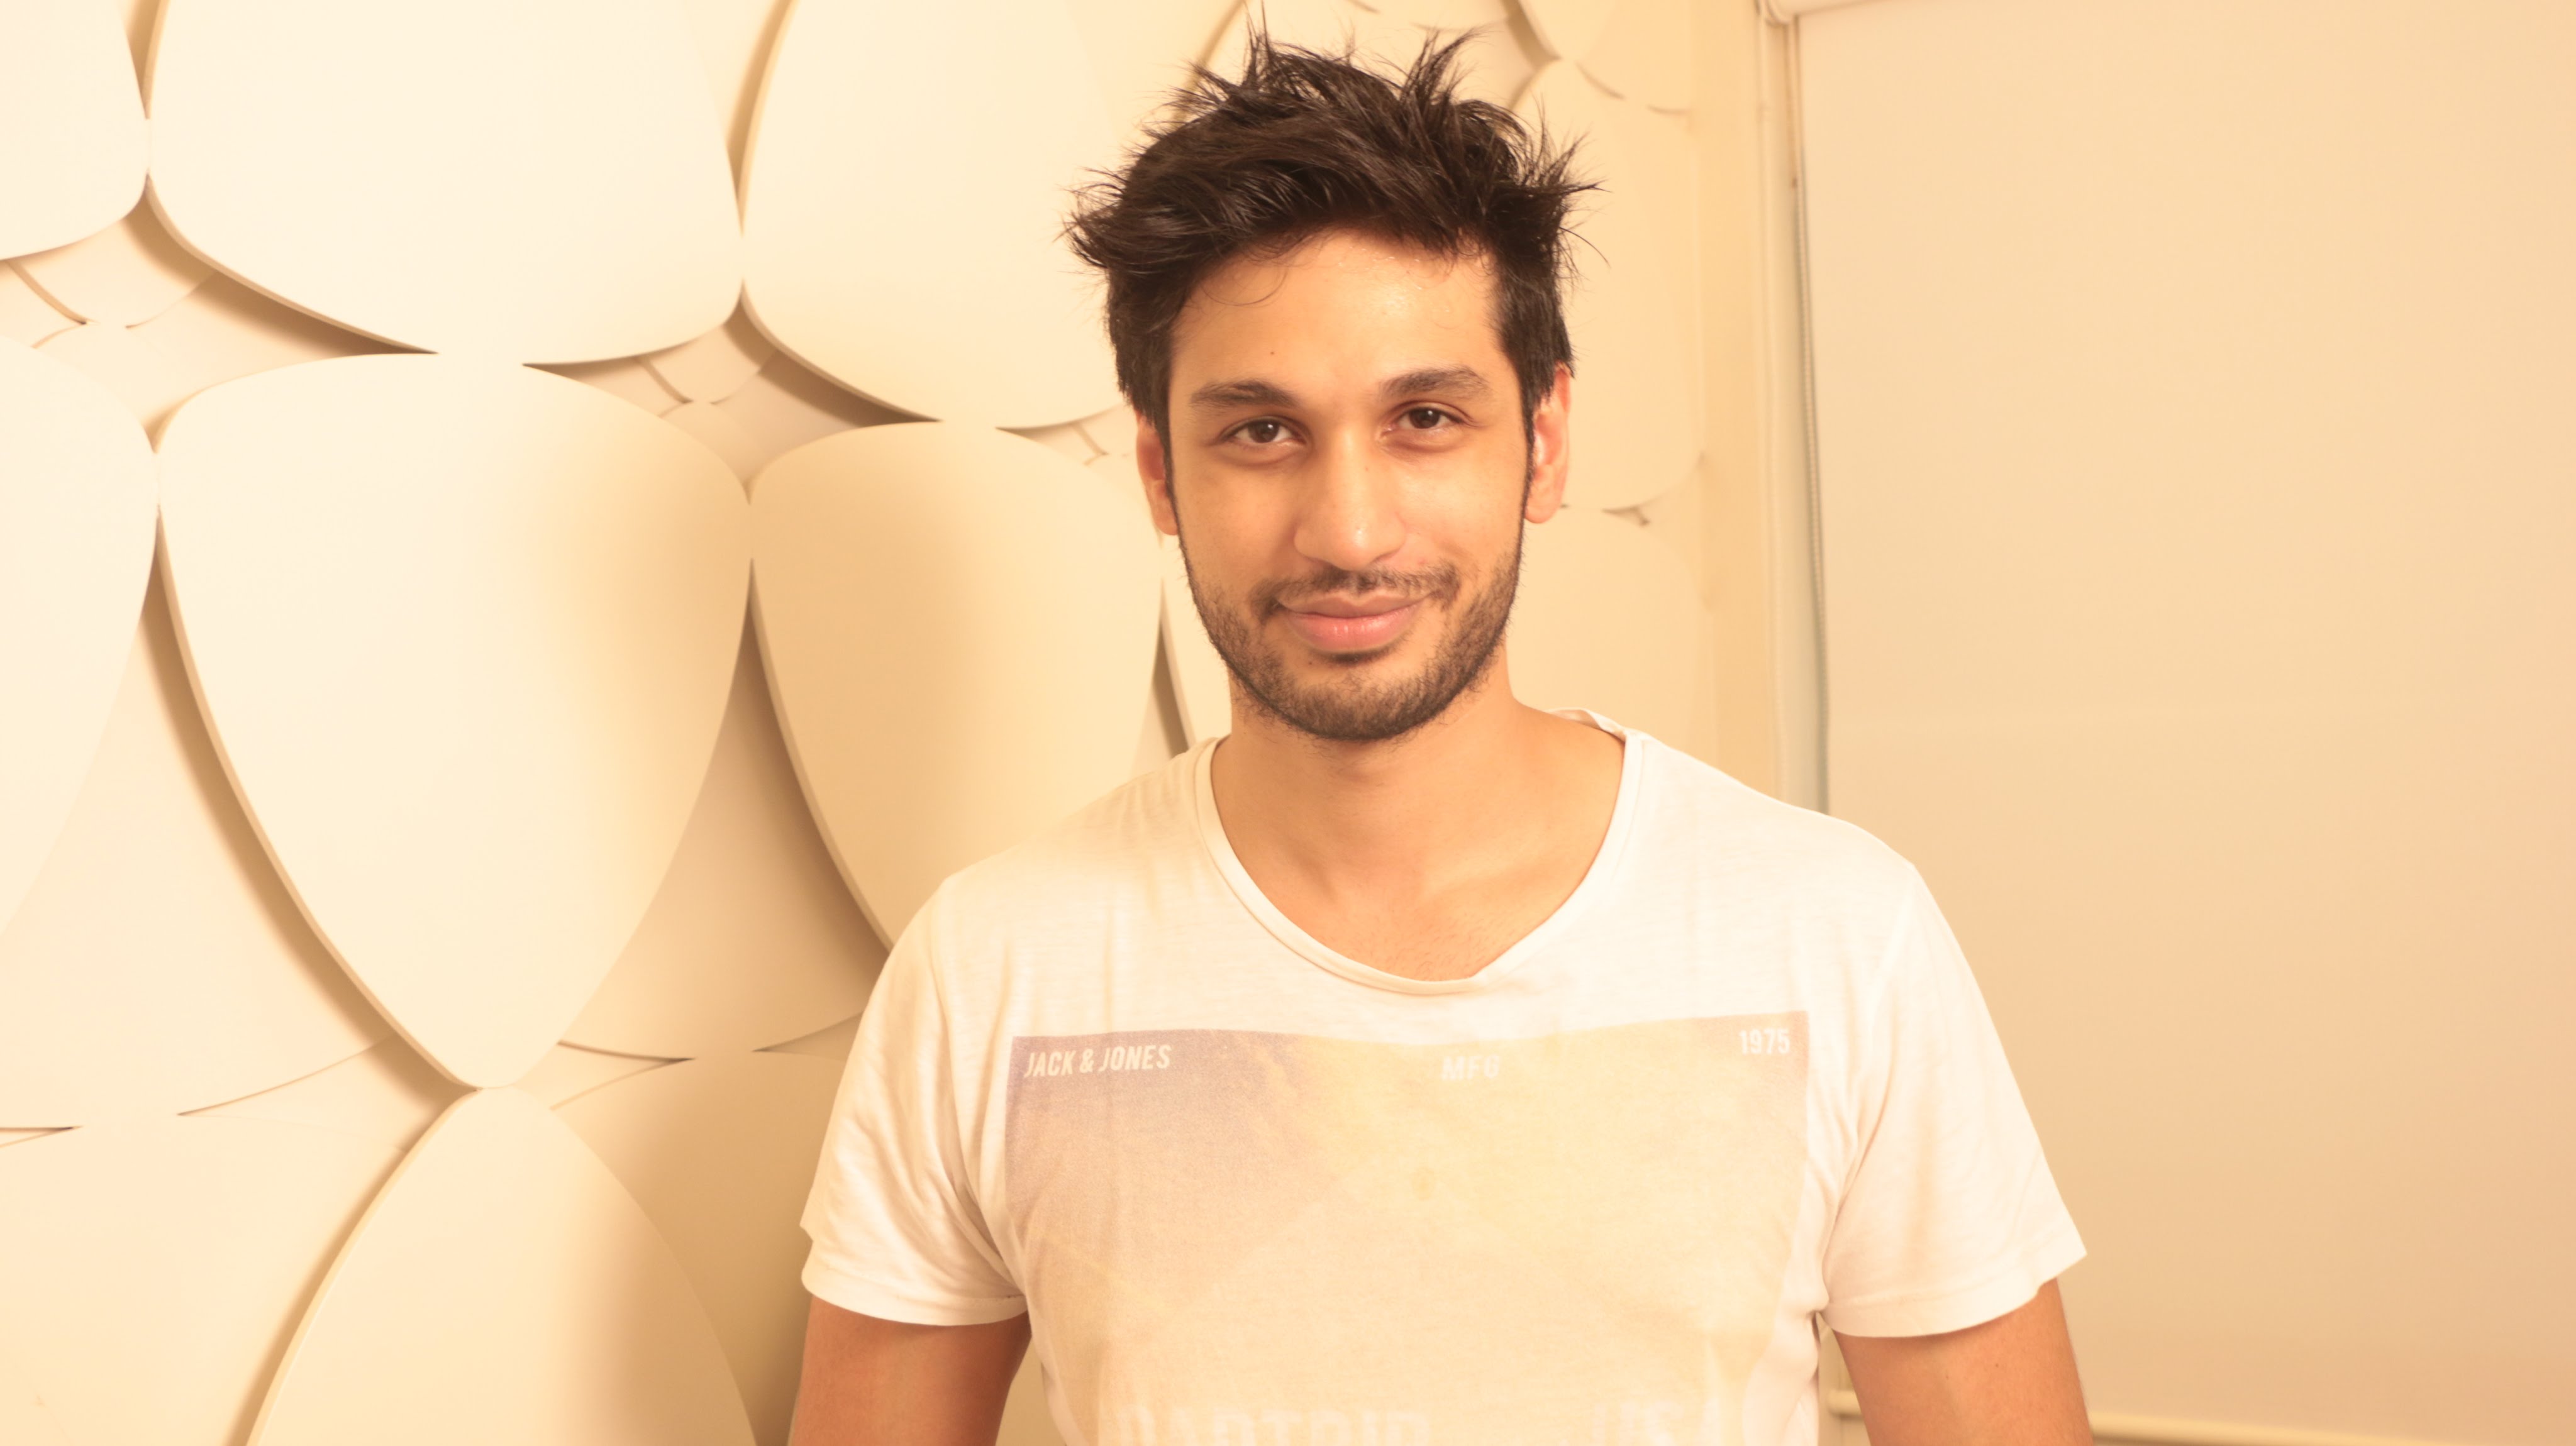 Arjun Kanungo - You caught me off guard for a moment 🙇🏽‍♂️ | Facebook